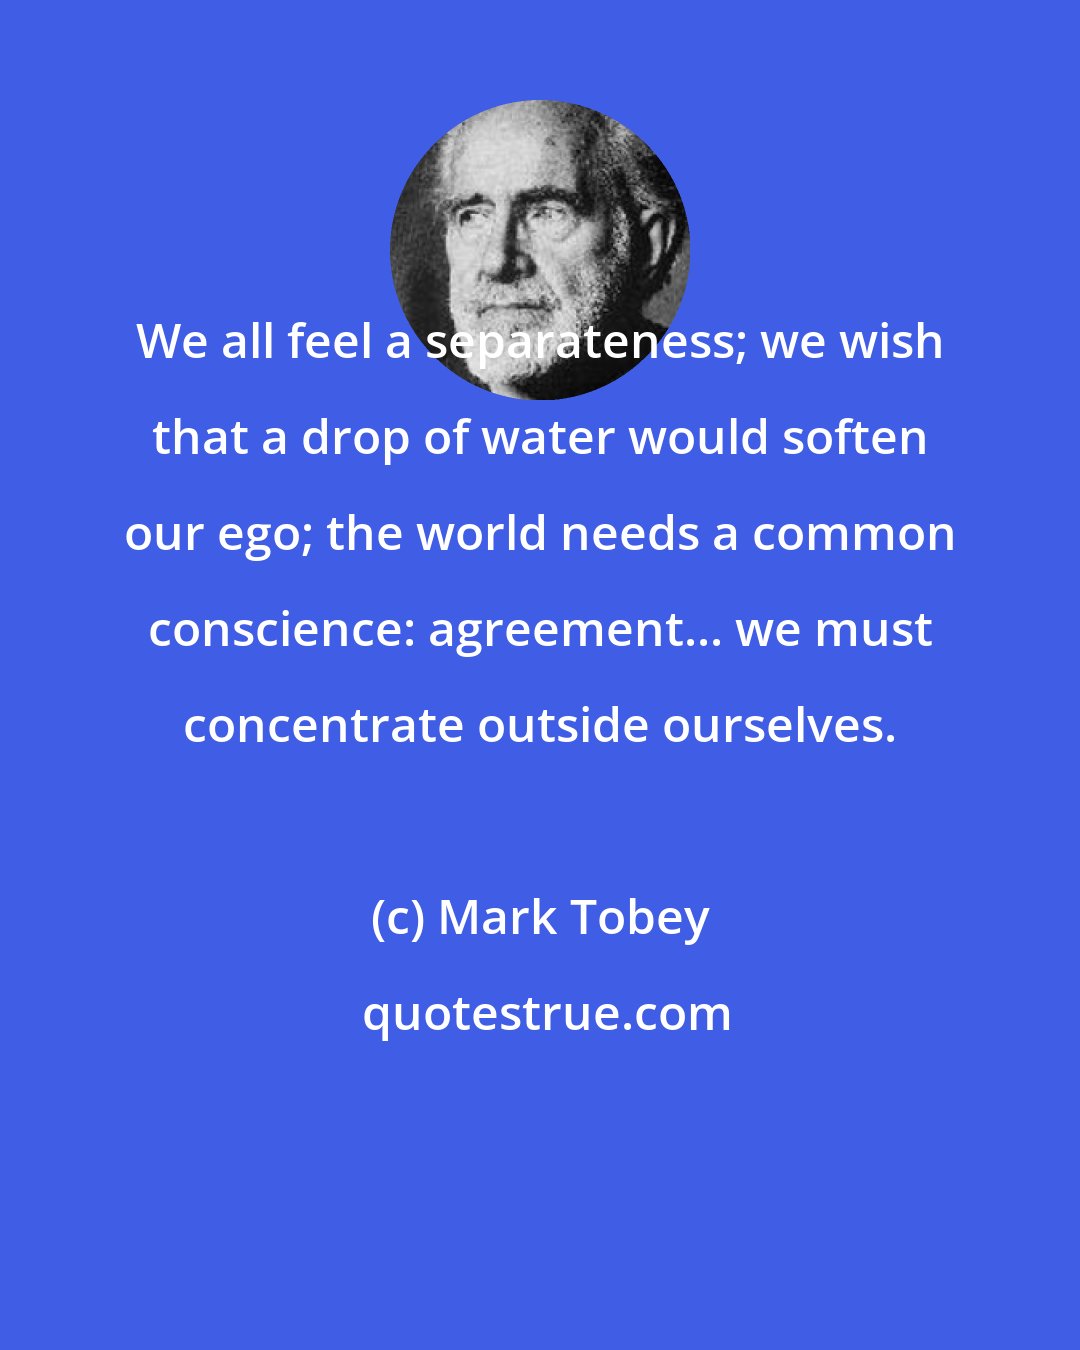 Mark Tobey: We all feel a separateness; we wish that a drop of water would soften our ego; the world needs a common conscience: agreement... we must concentrate outside ourselves.